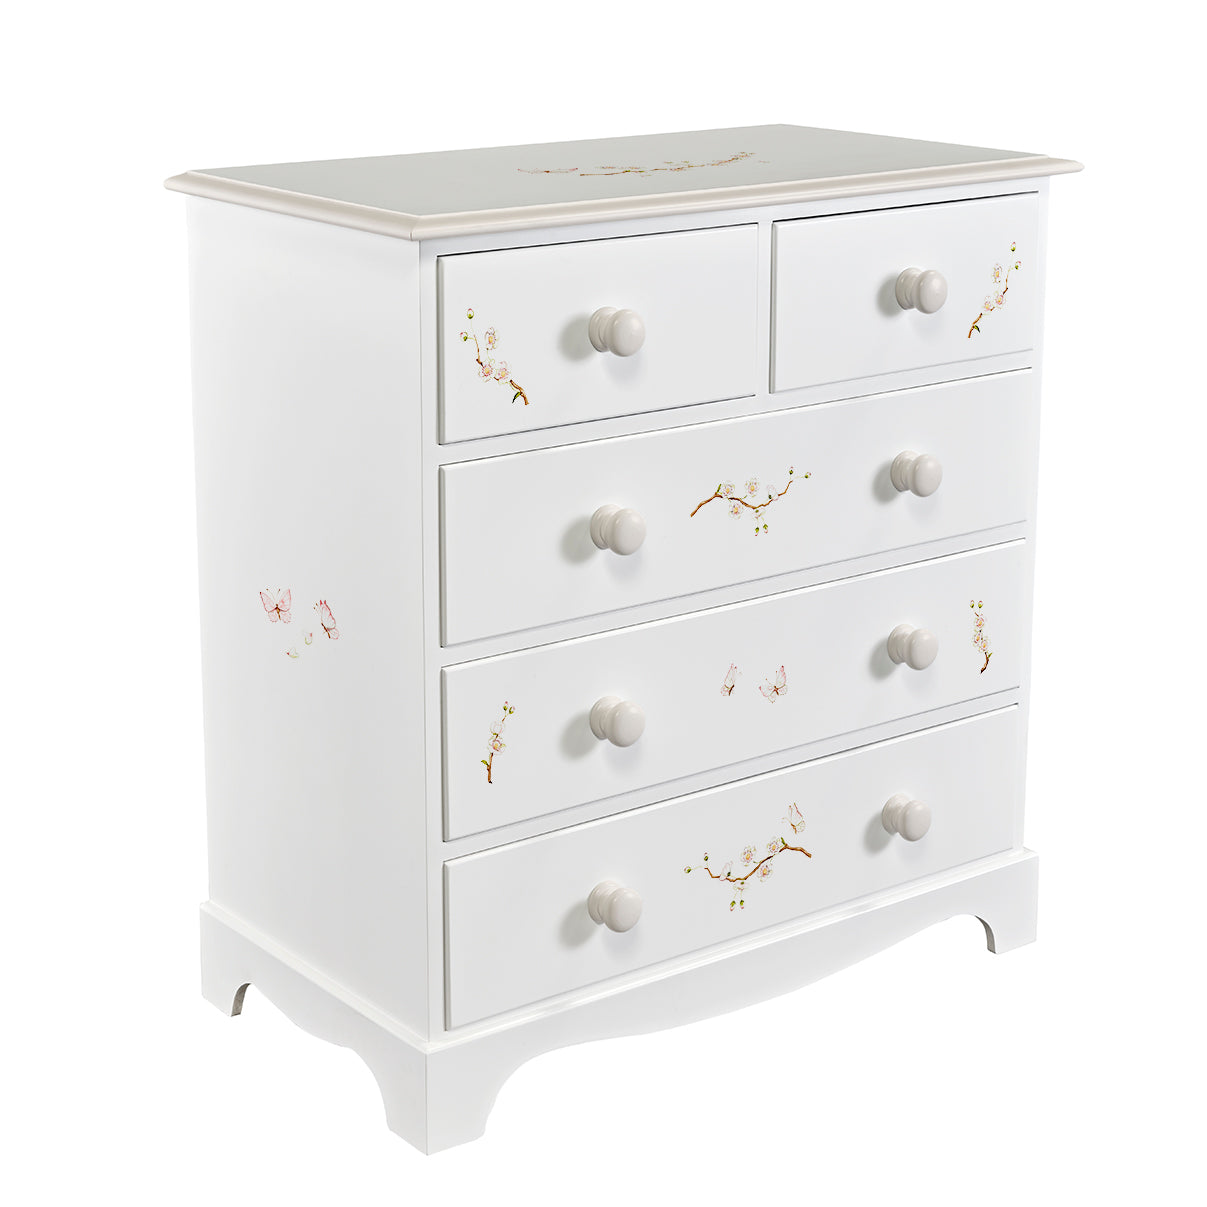 Large Chest of Drawers - Linen Blossom with Soft Jute Trim